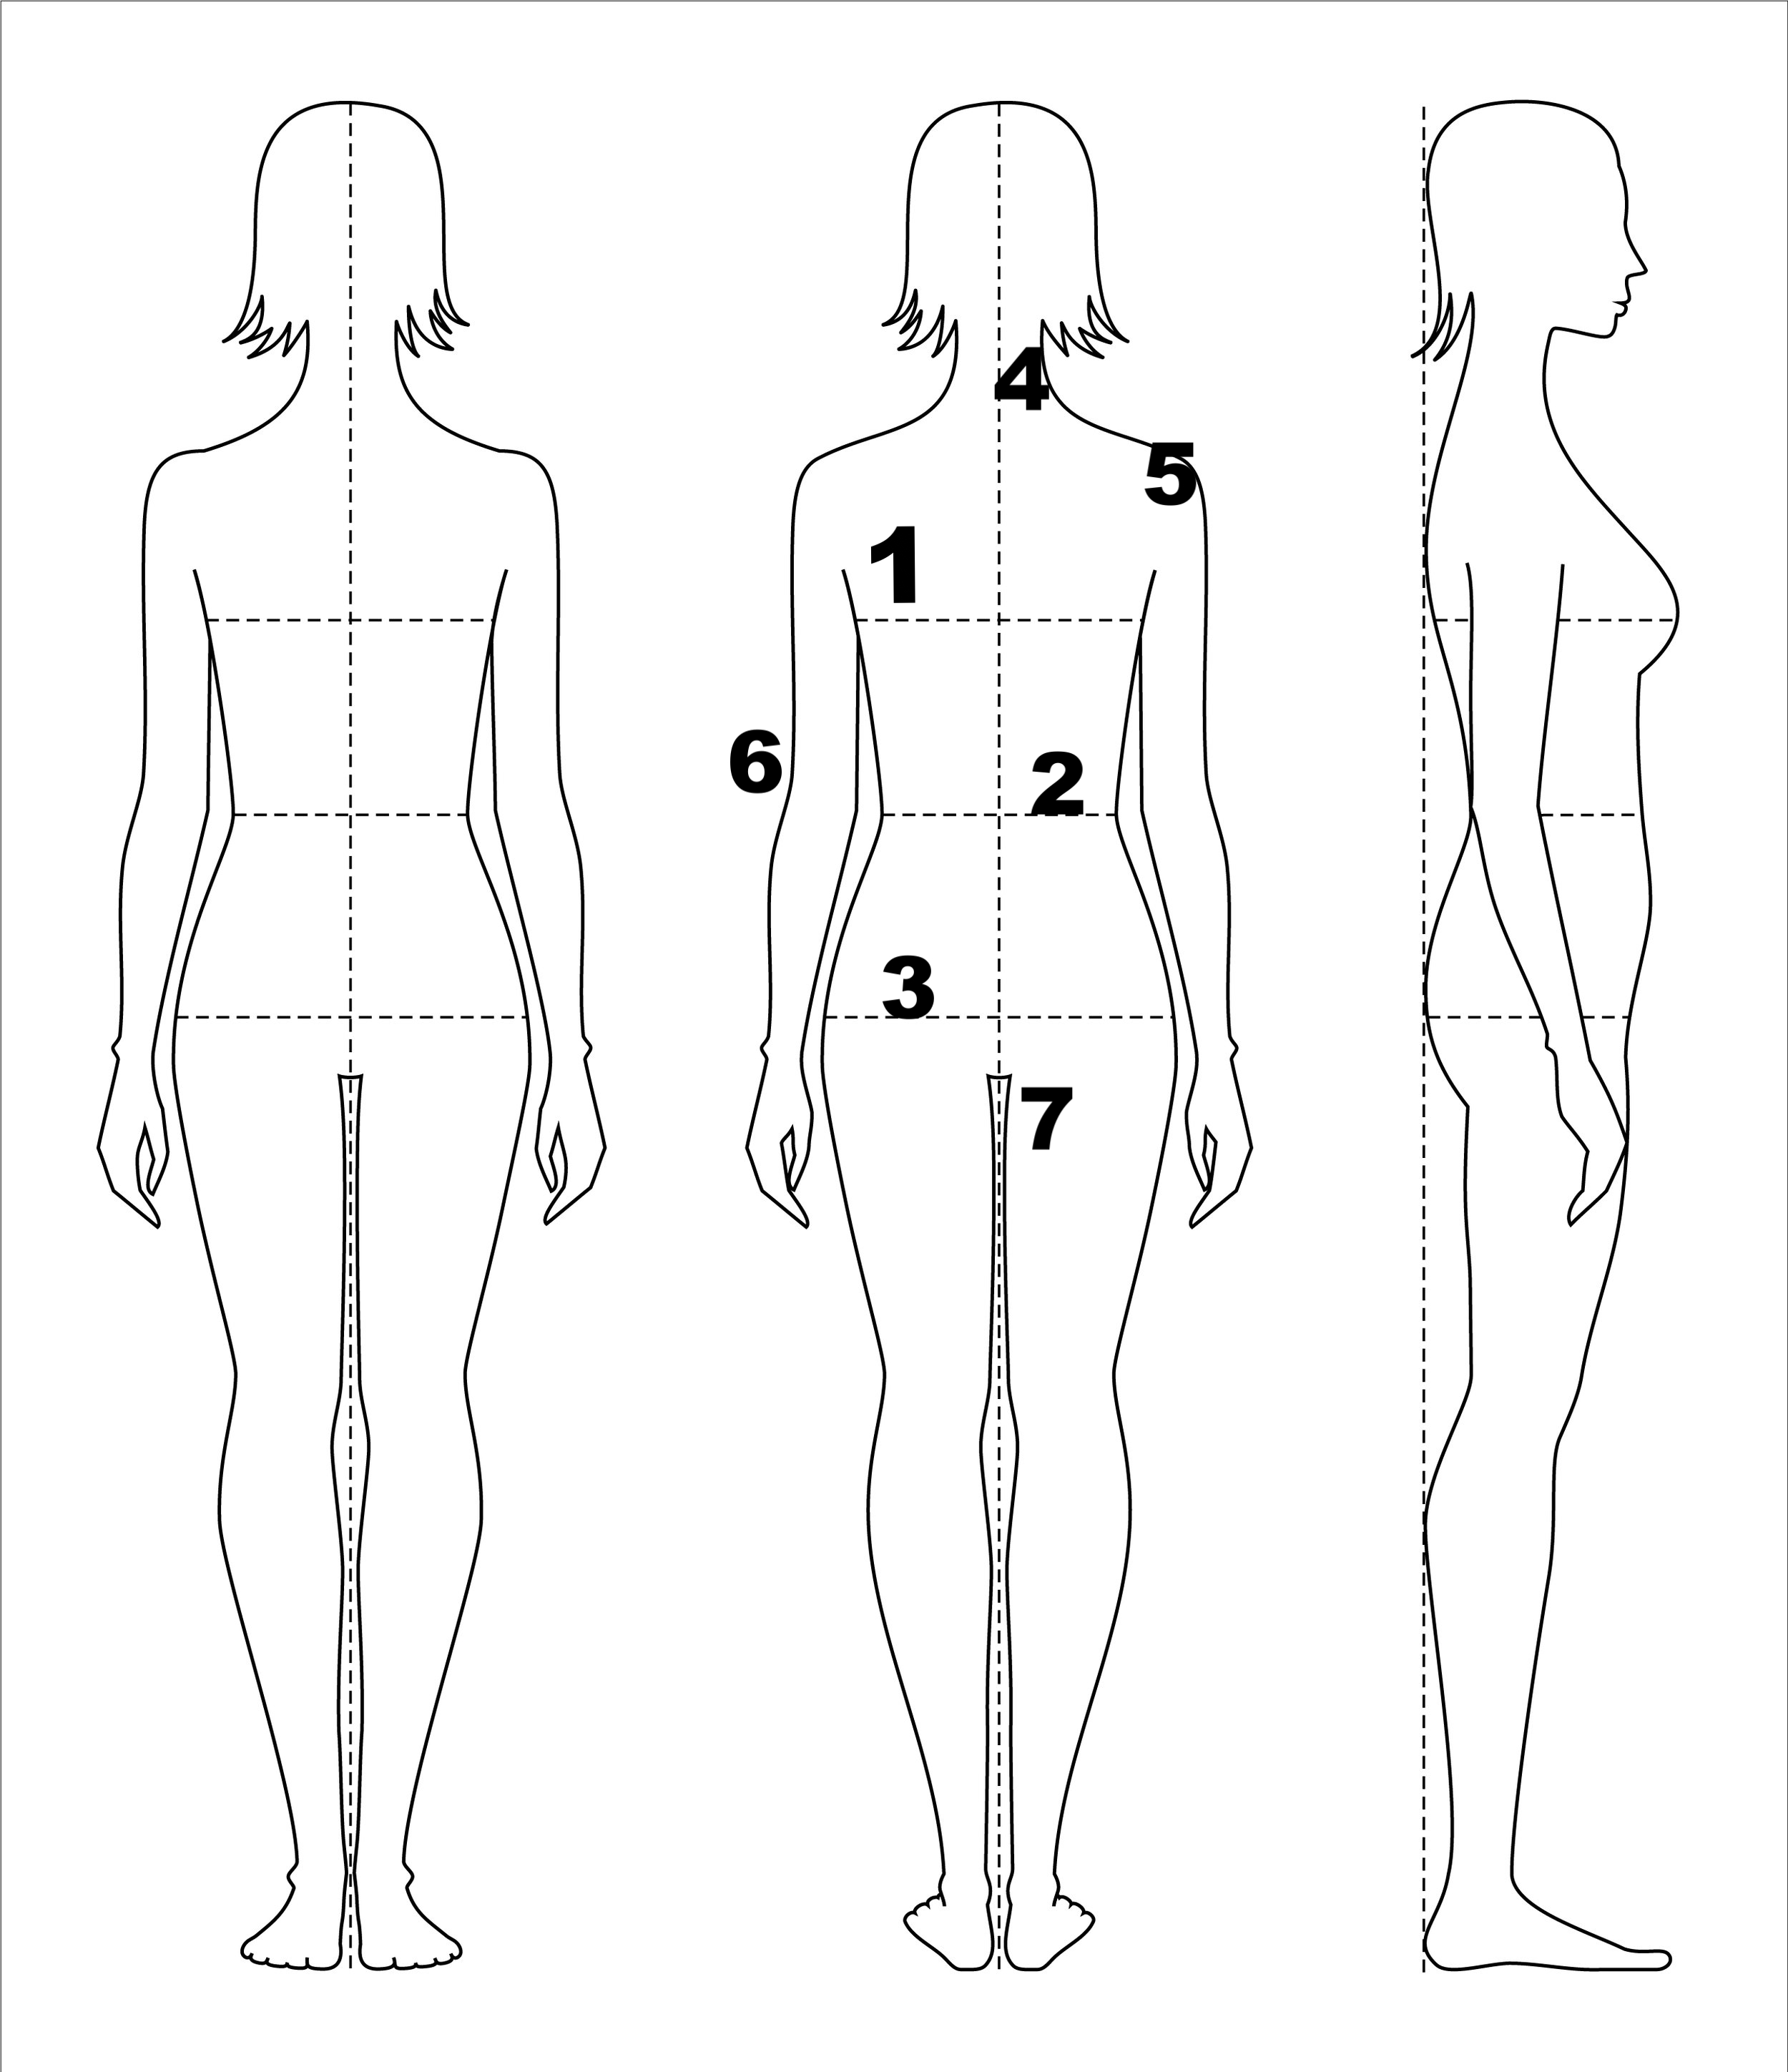 How to Take Body Measurements